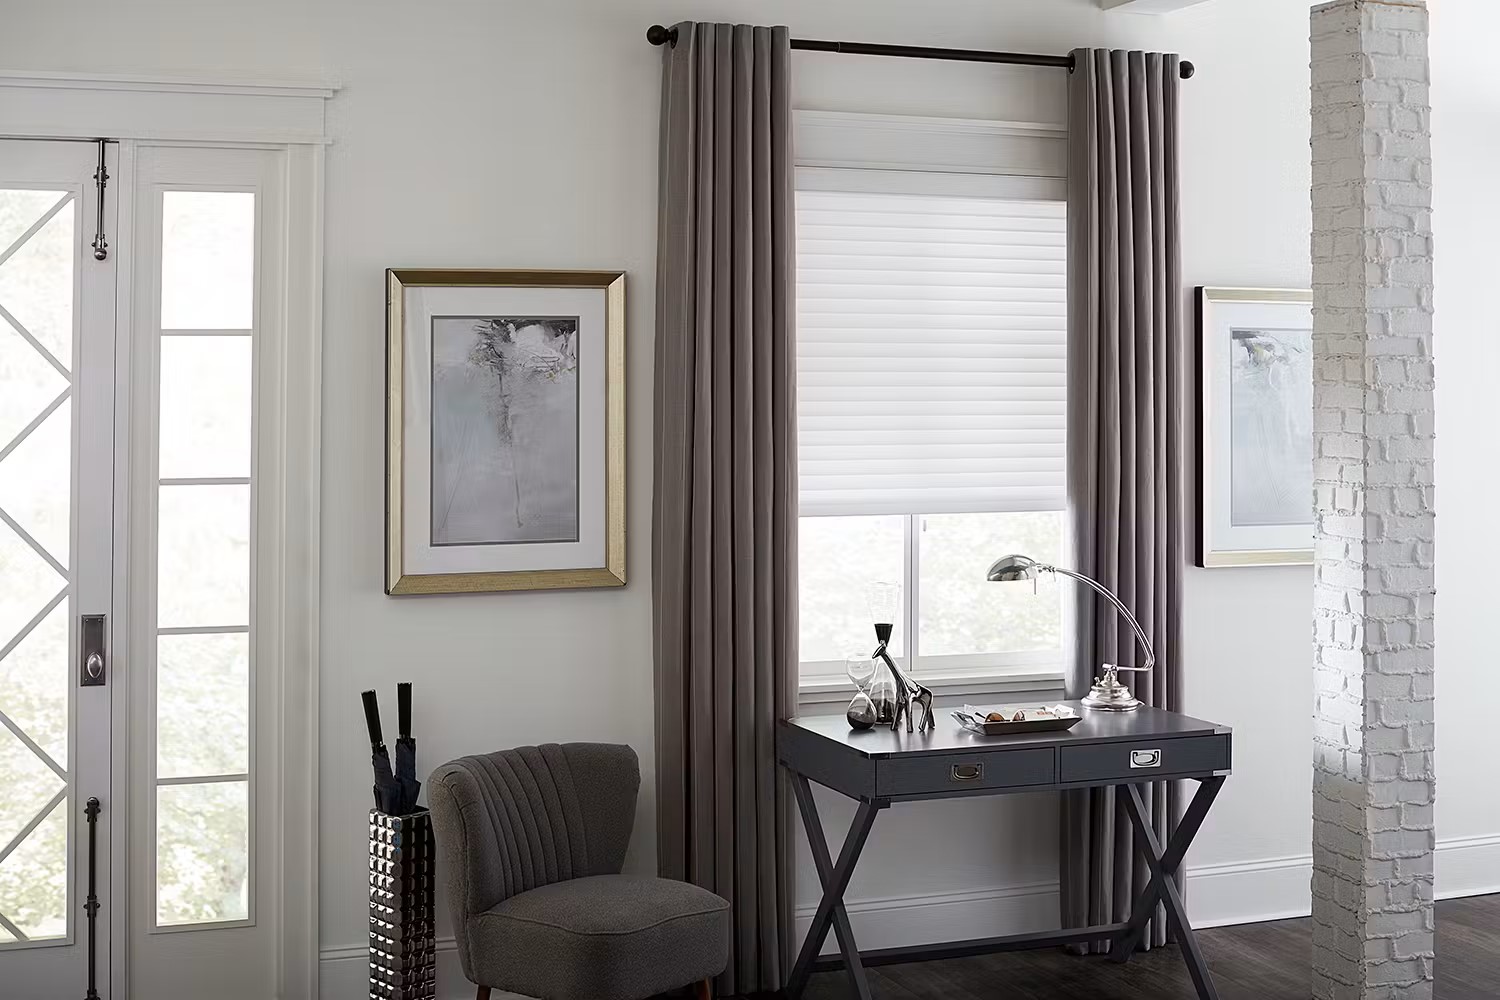 How To Put Up Curtains Over Blinds